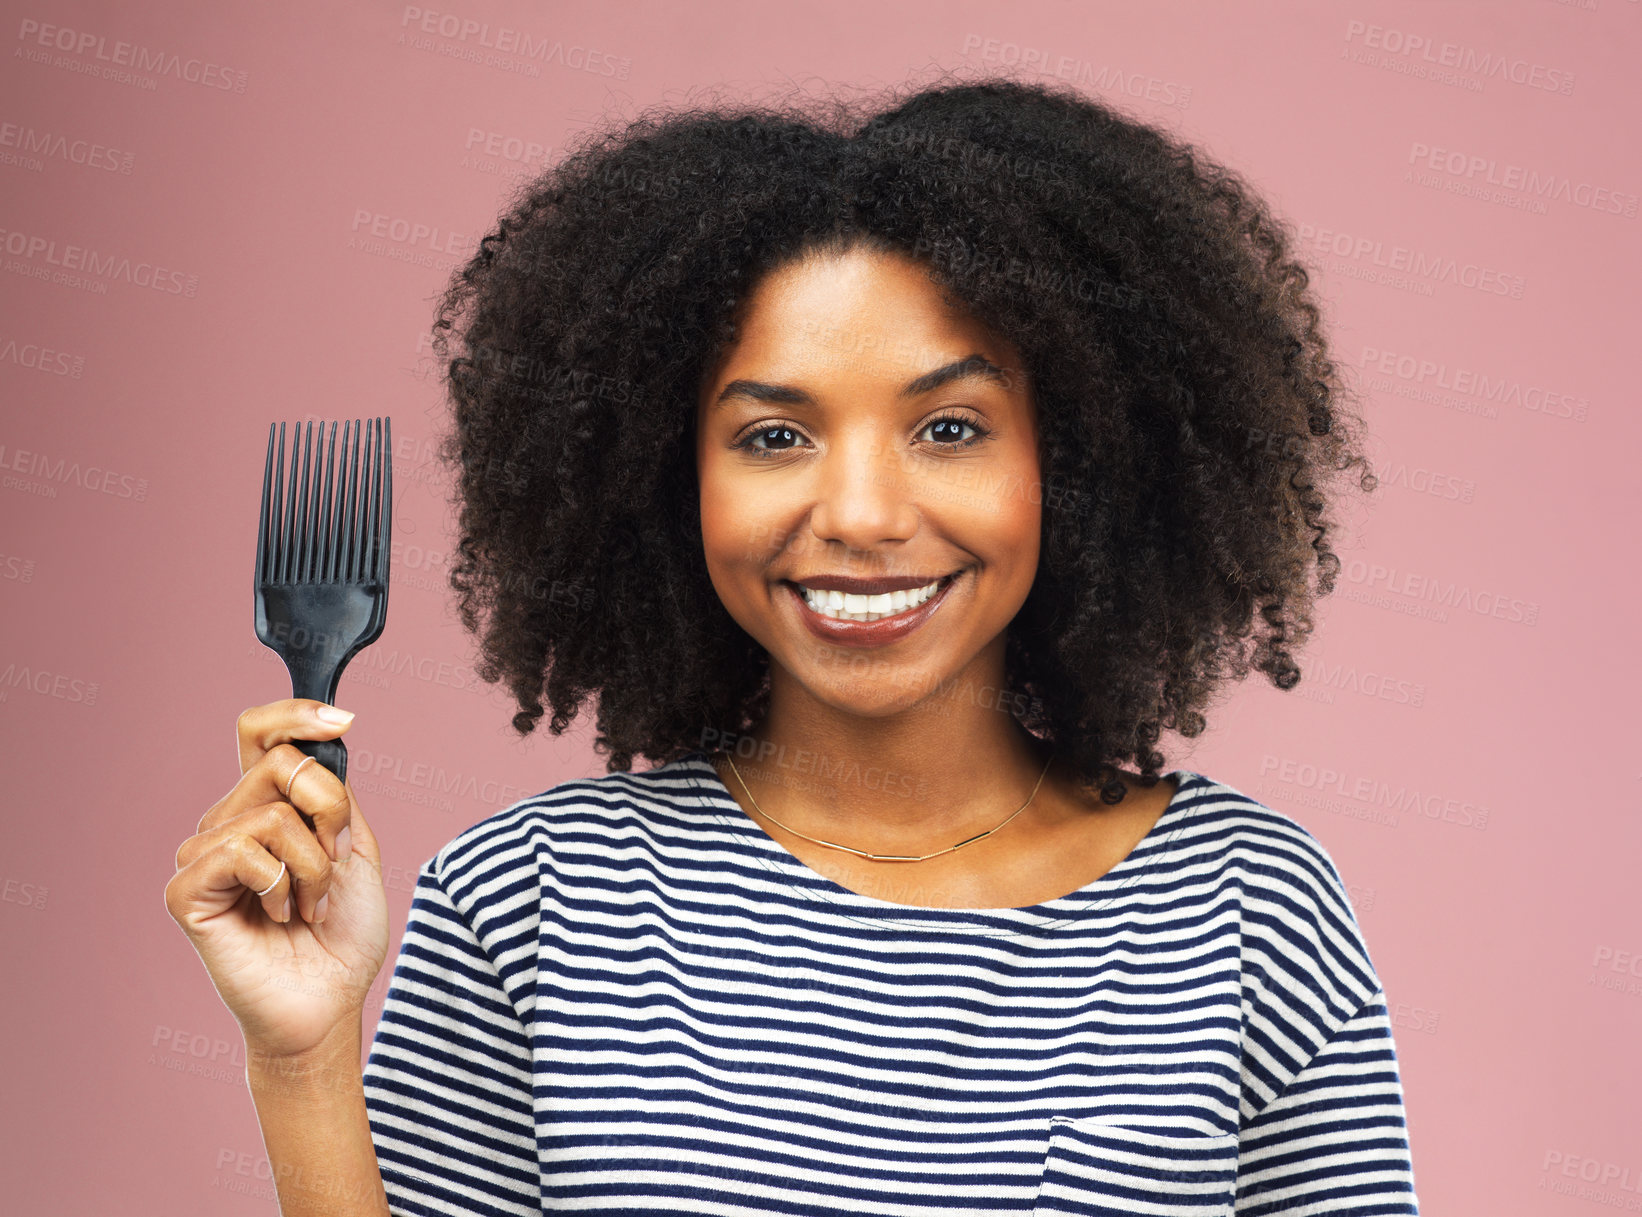 Buy stock photo Studio shot of a beautiful young woman holding up an afro comb